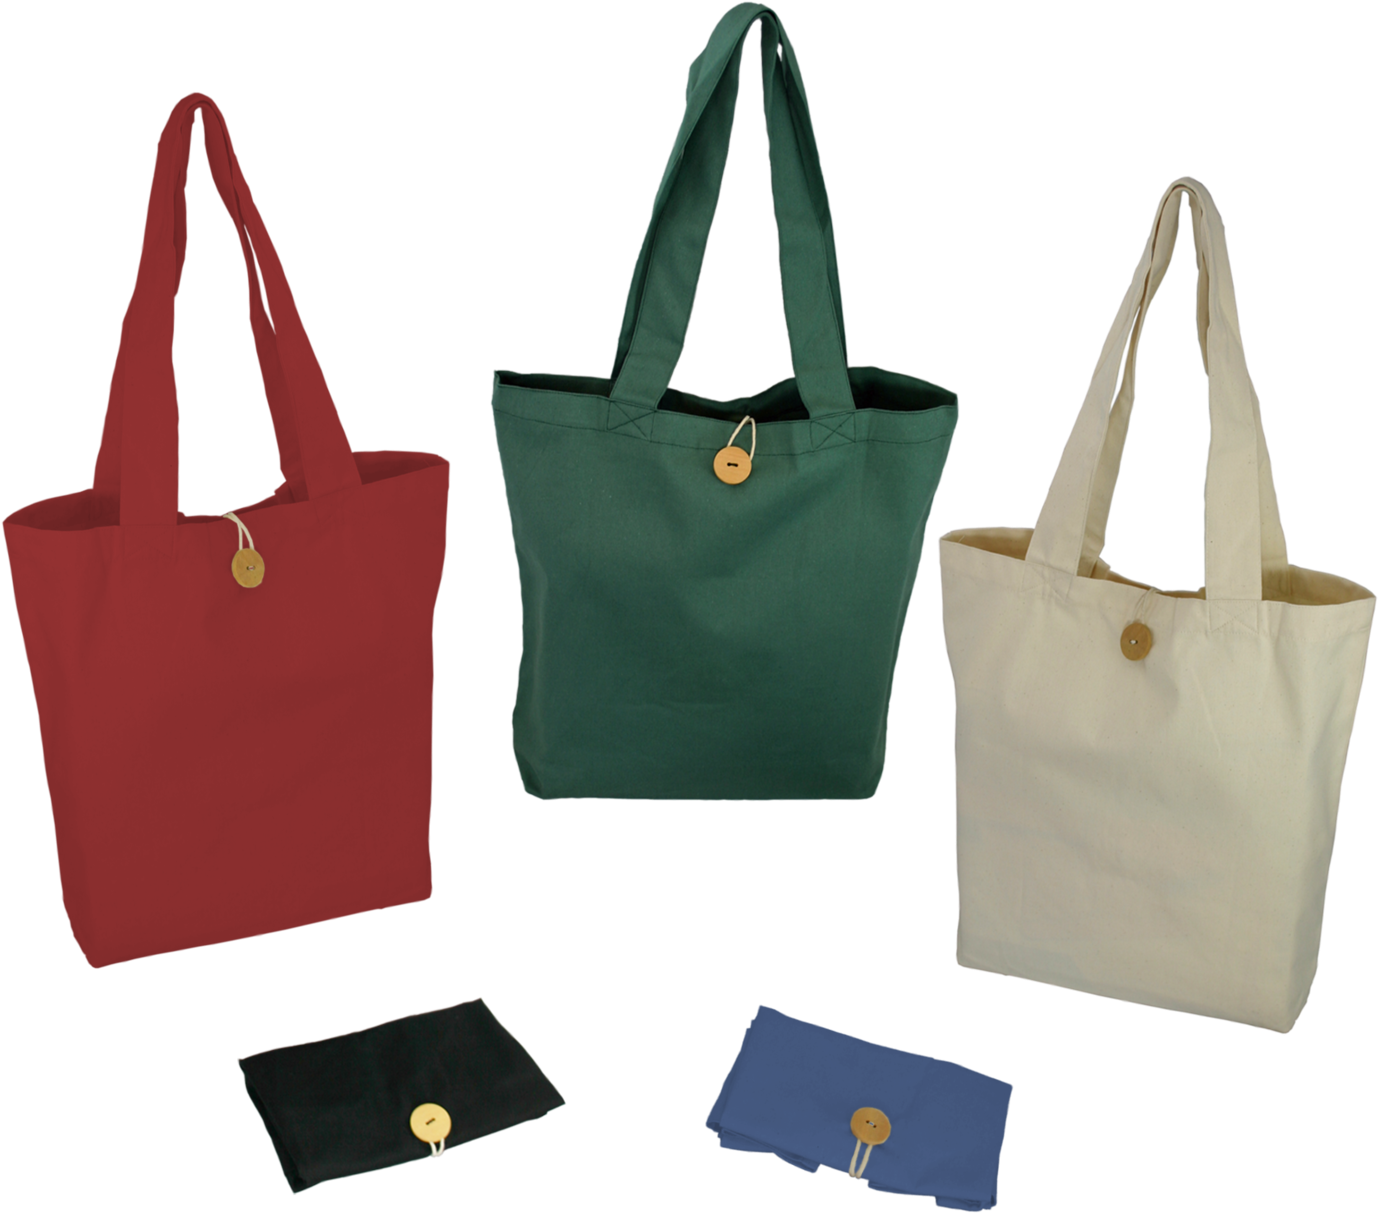 Assorted Canvas Tote Bags PNG image